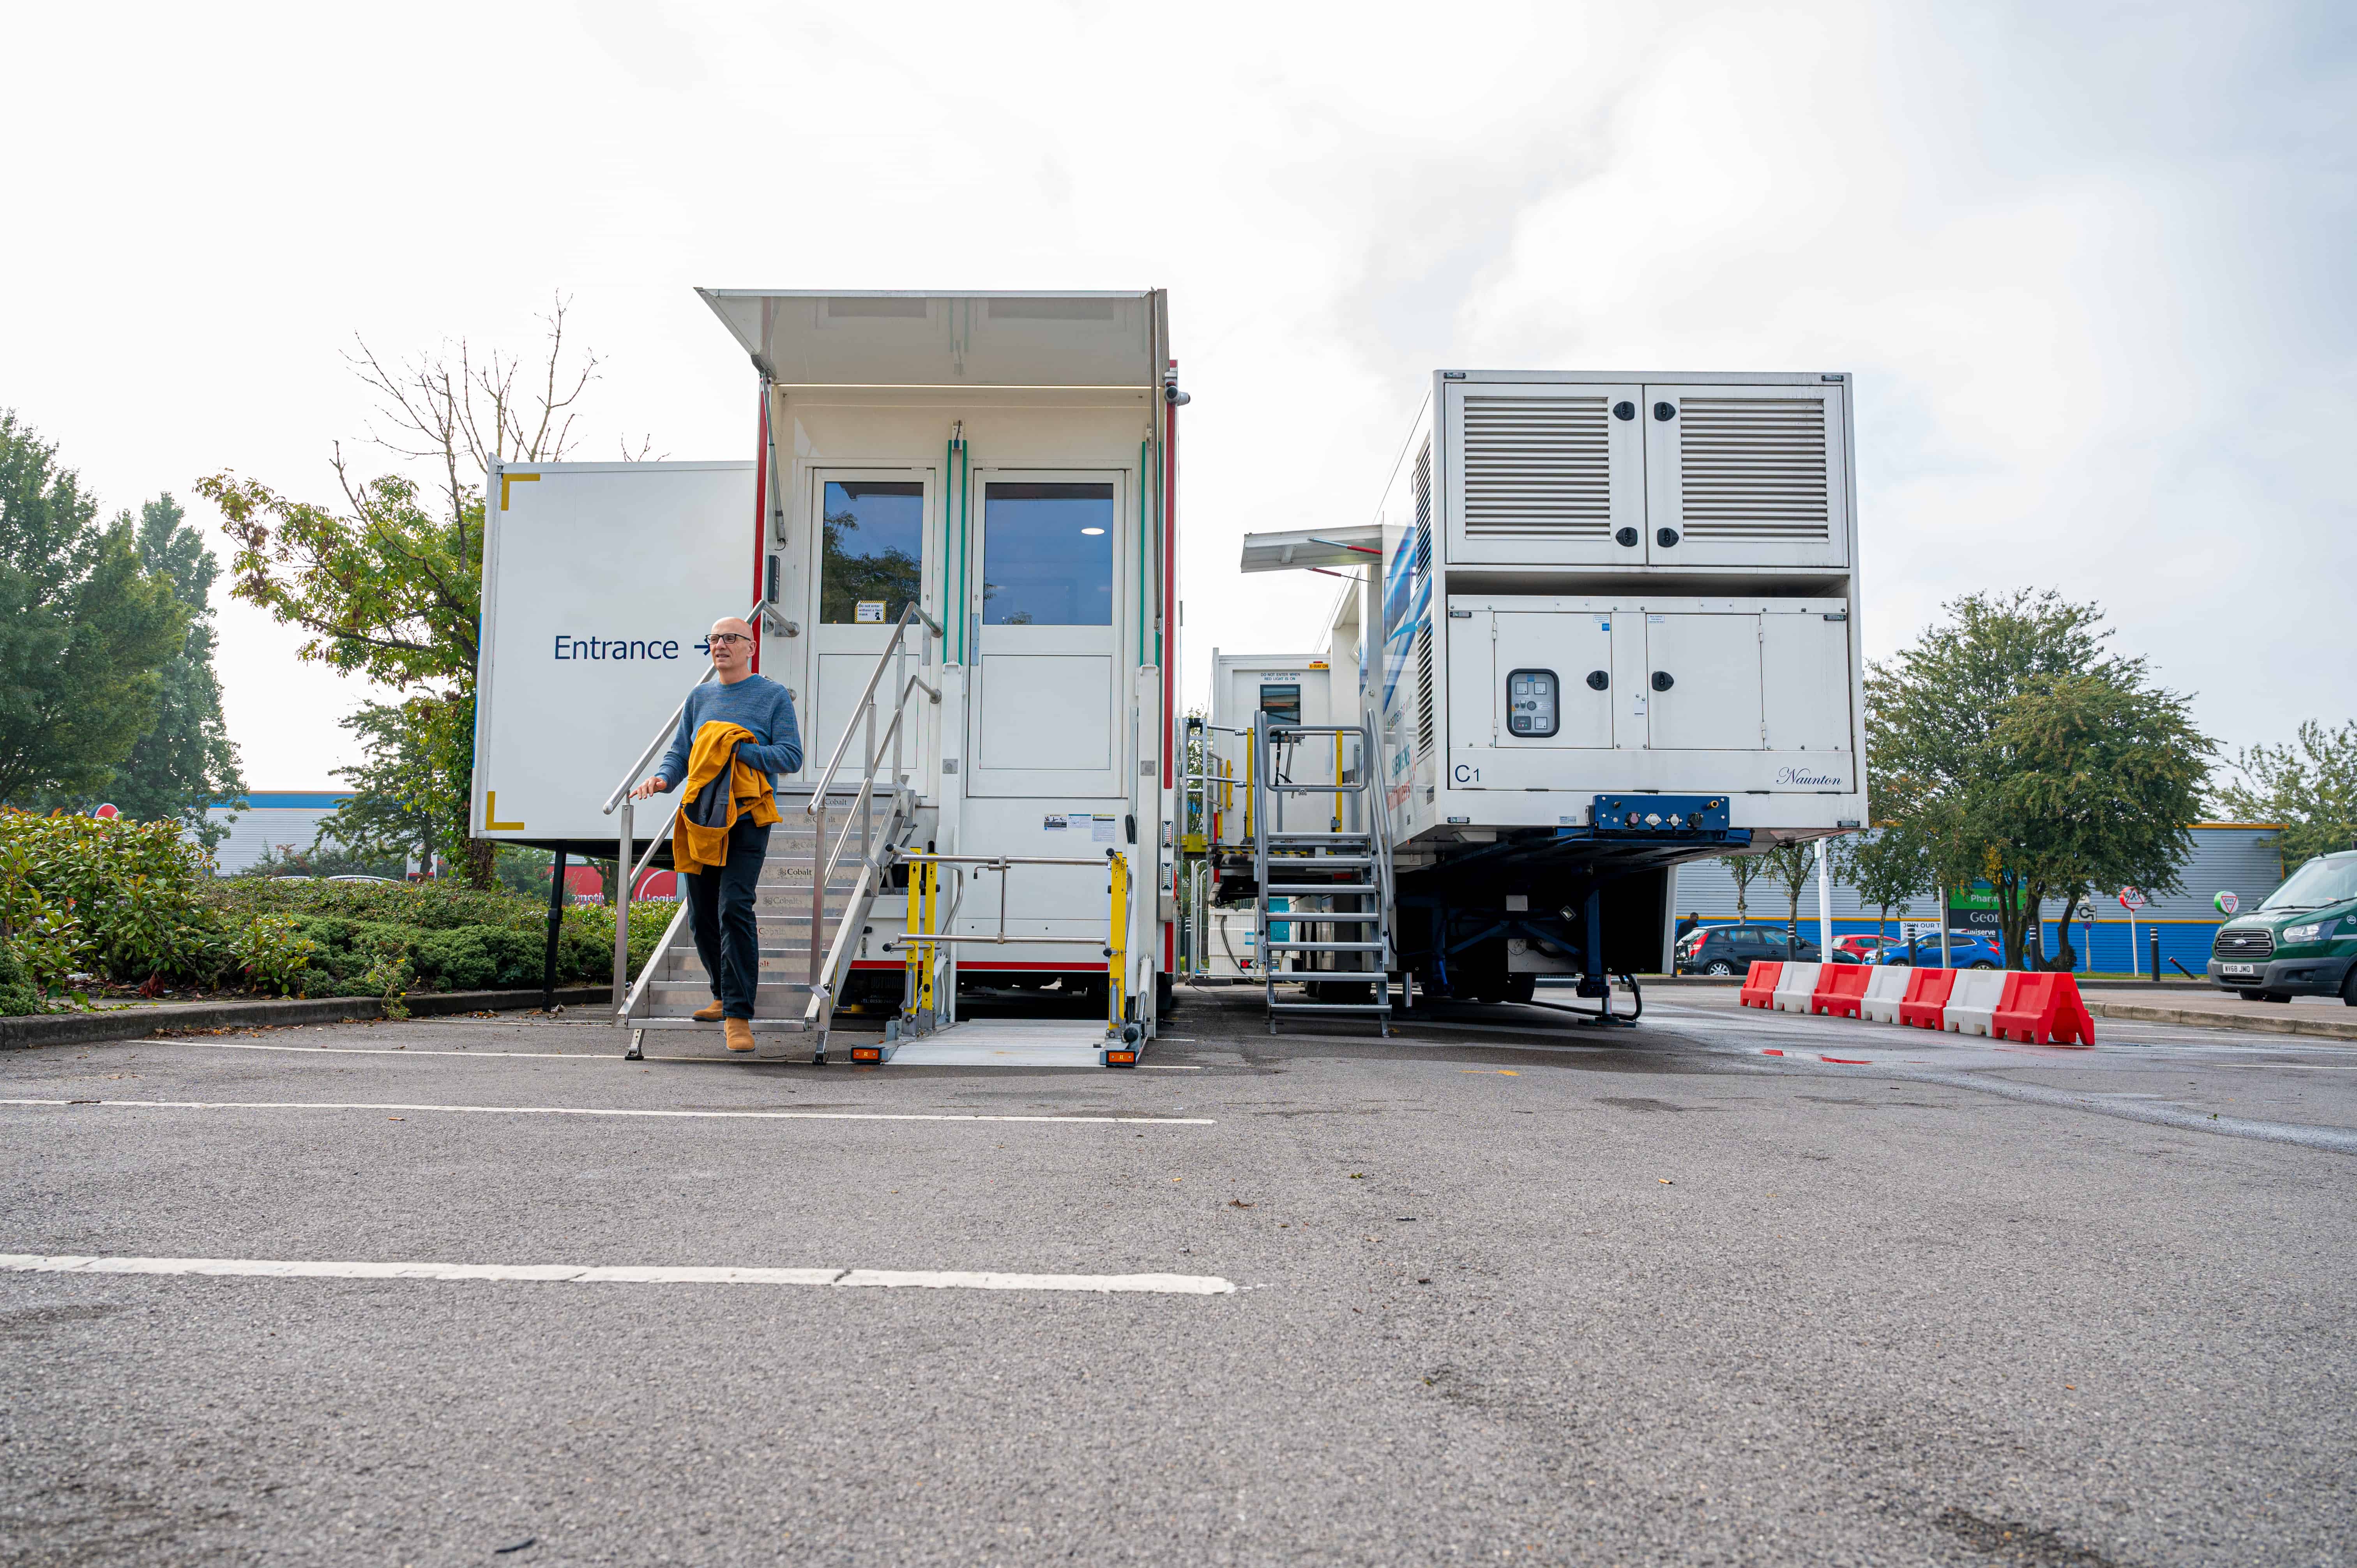 Image of a large mobile unit which is parked in a car park. A man is walking down some steps away from the unit.